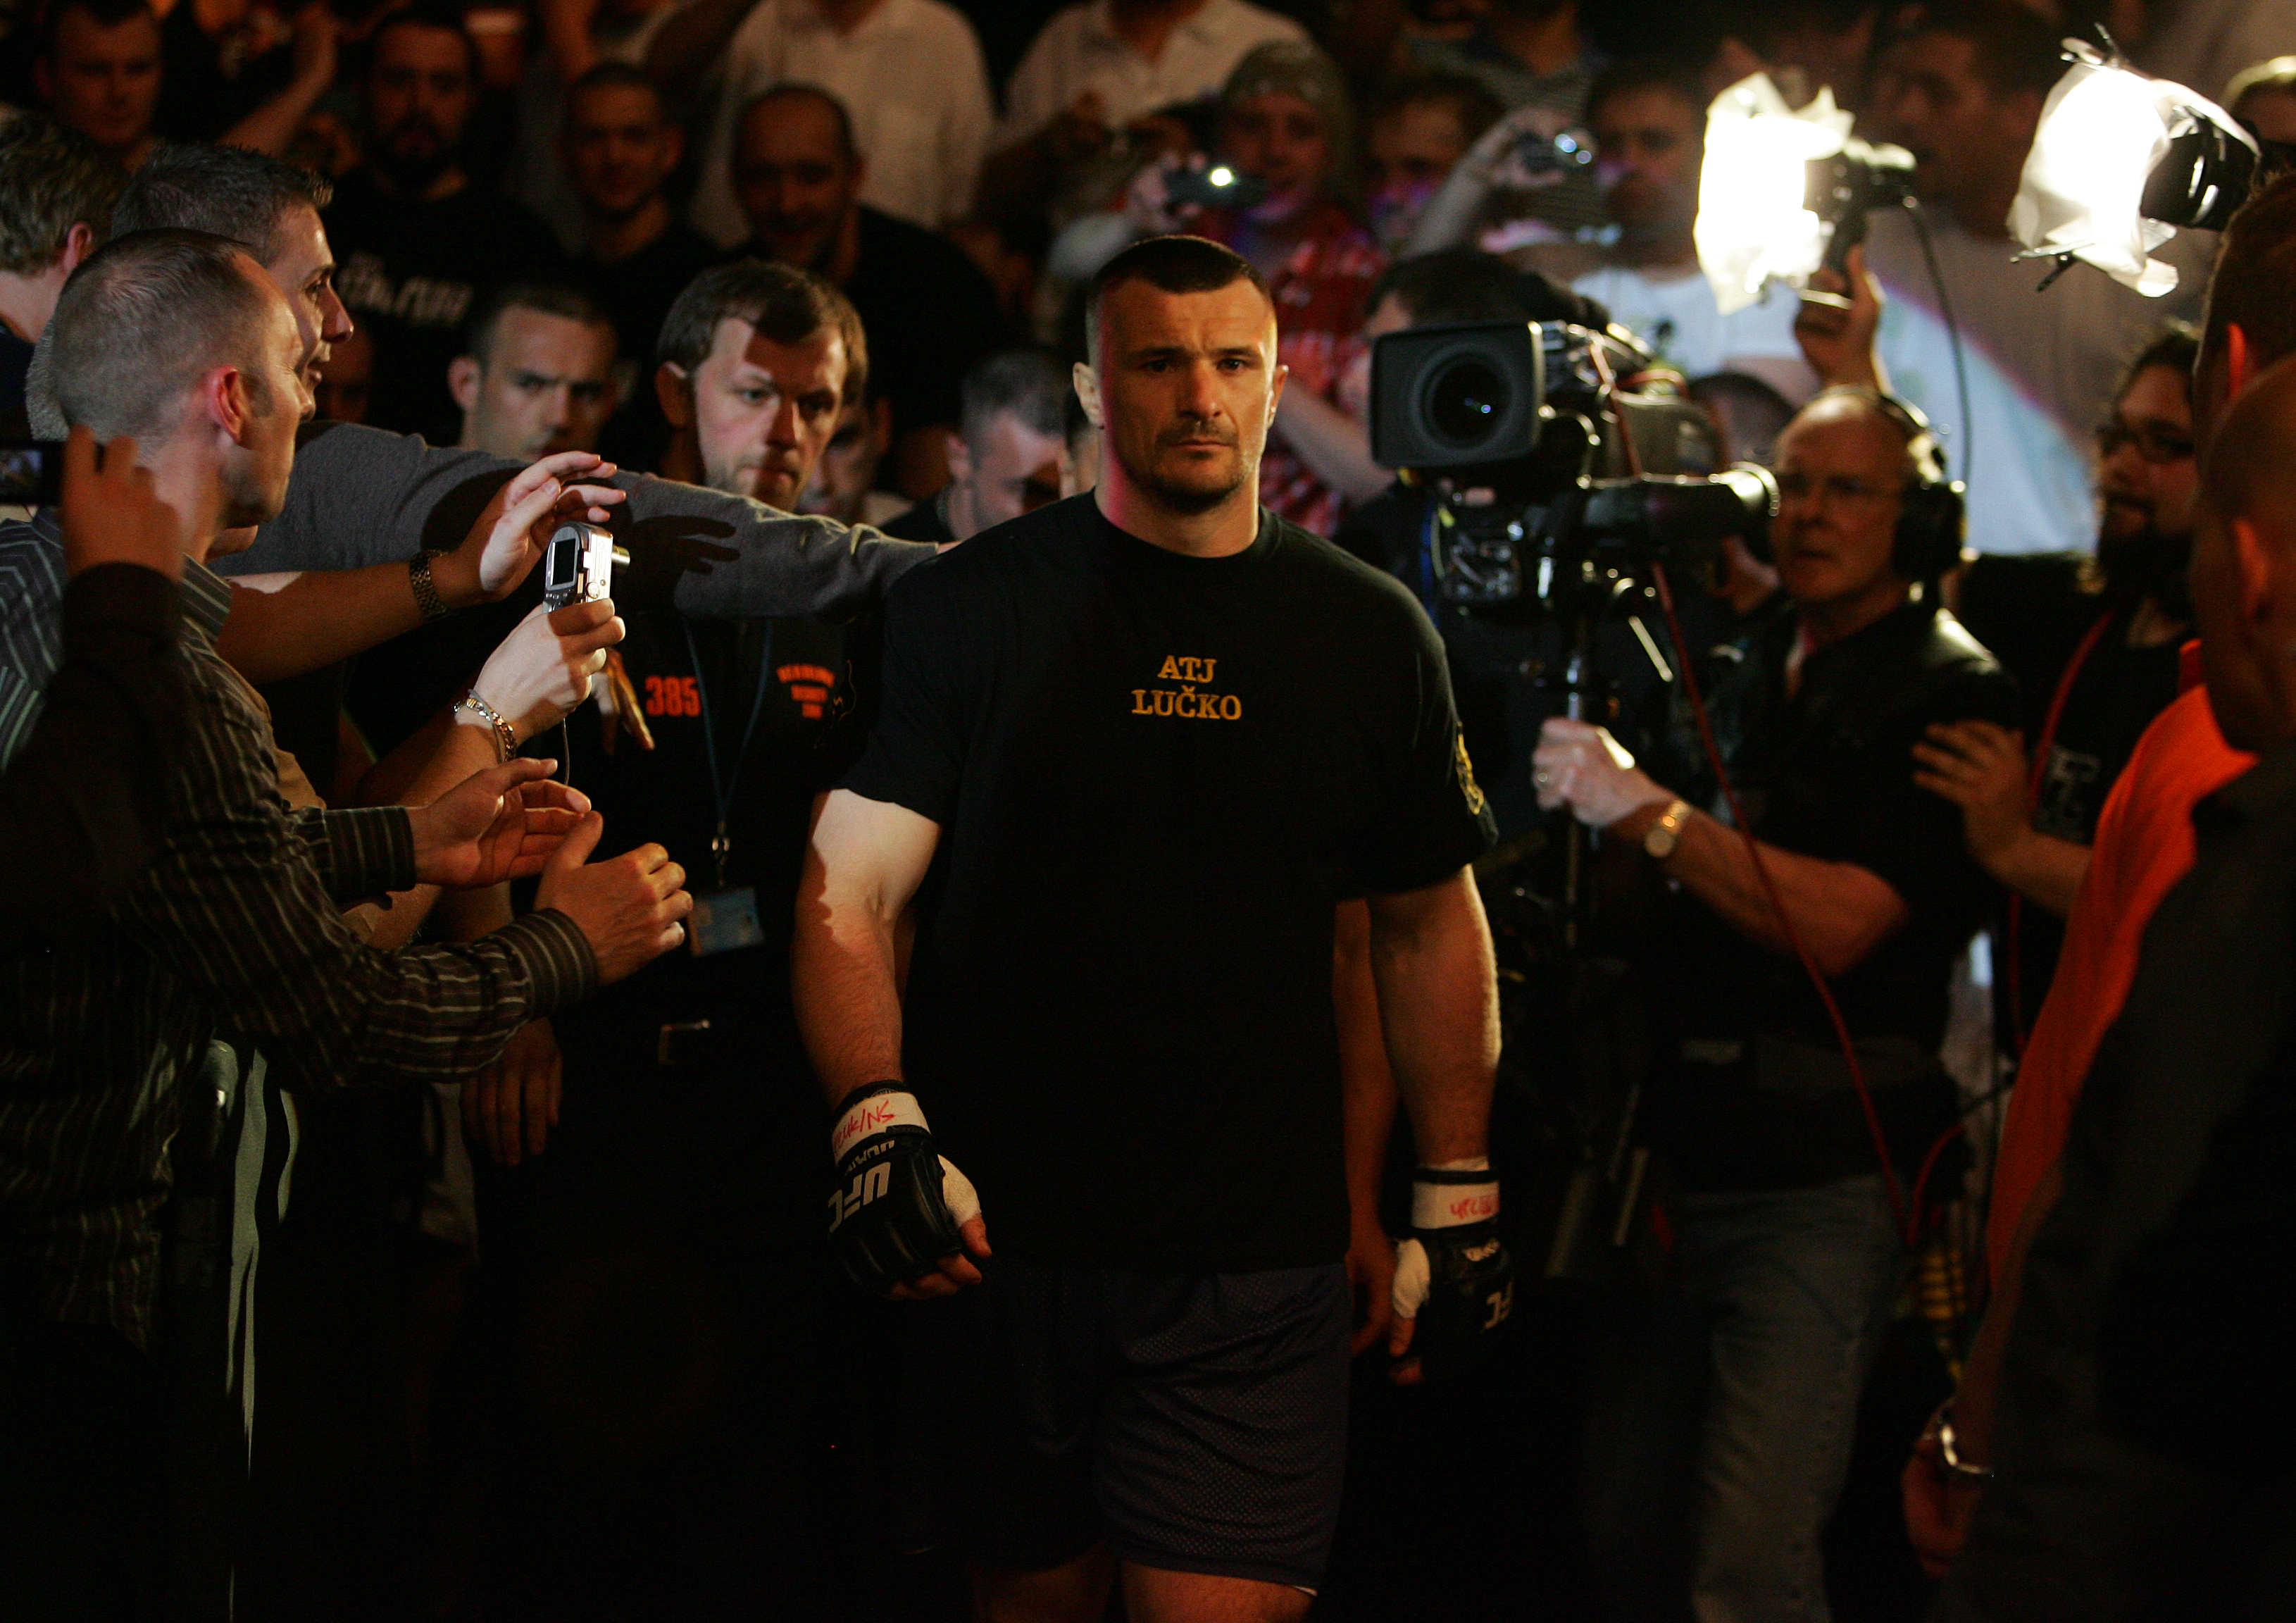 MANCHESTER, UNITED KINGDOM - APRIL 21: A pensive Mirko Cro Cop of Croatia walks to the octagon before fighting Gabriel Gonzaga of USA in a Heavyweight bout of the Ultimate Fighting Championship at the Manchester Evening News Arena on April 21, 2007 in Man